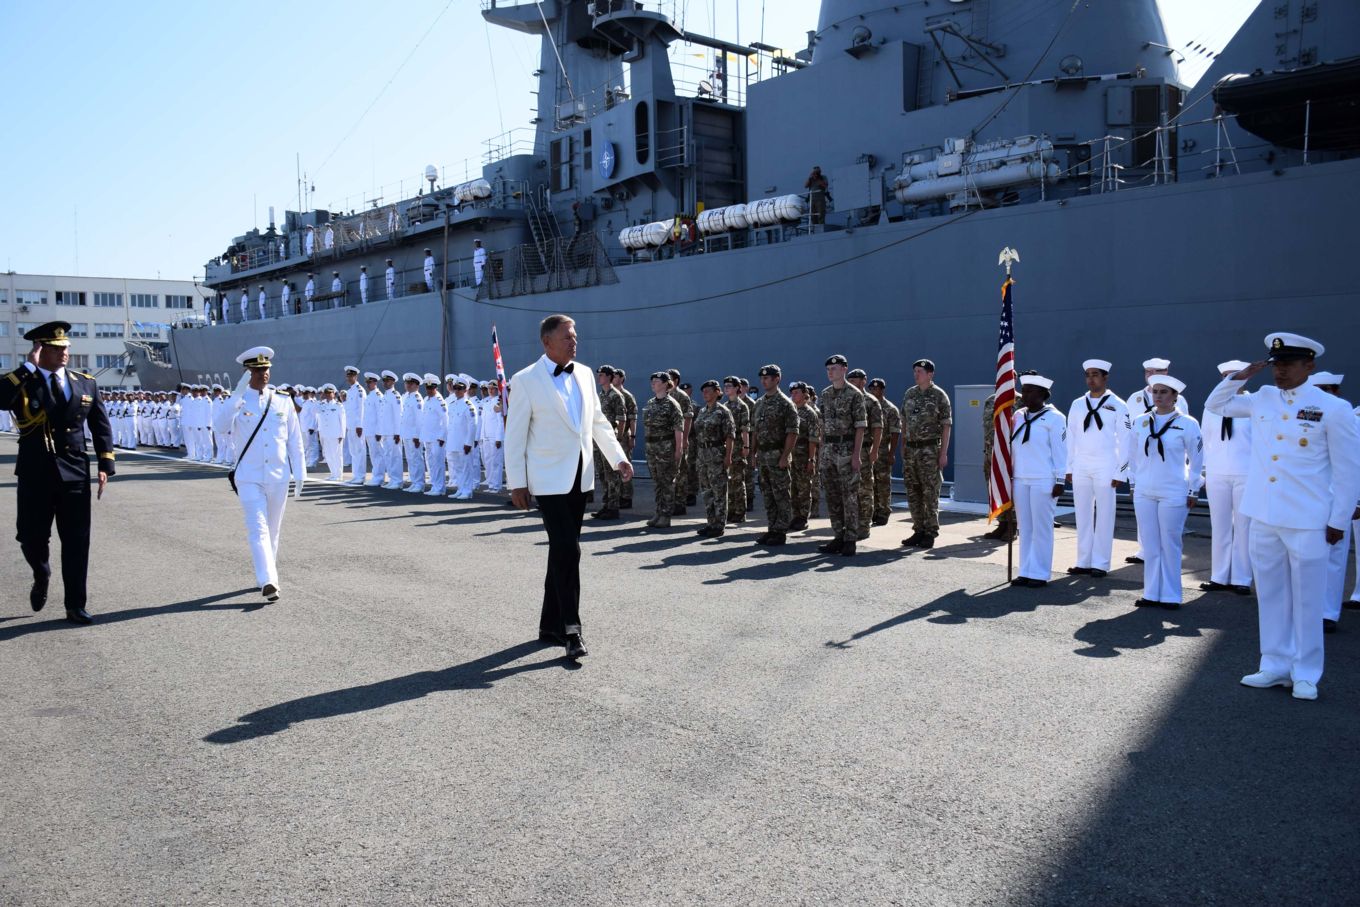 Navy and RAF personnel stand in parade, with President of Romania, Klaus Johannis leading the address.